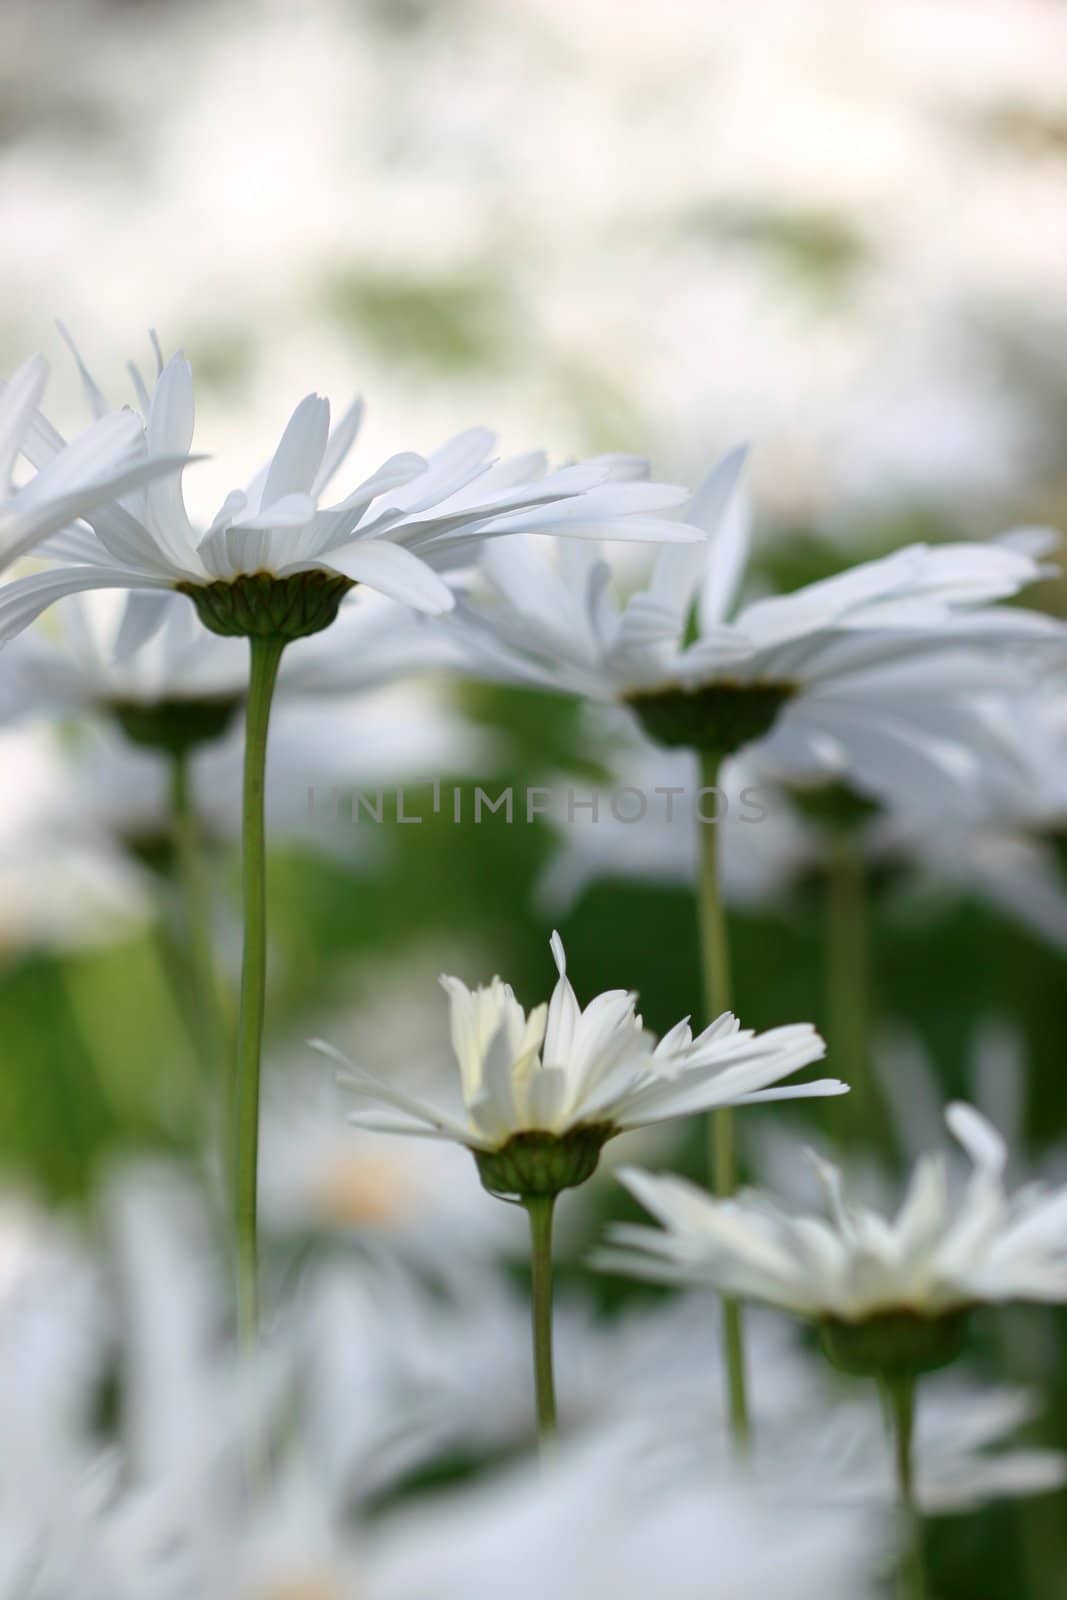 Beautiful image of daisies - shallow depth of field